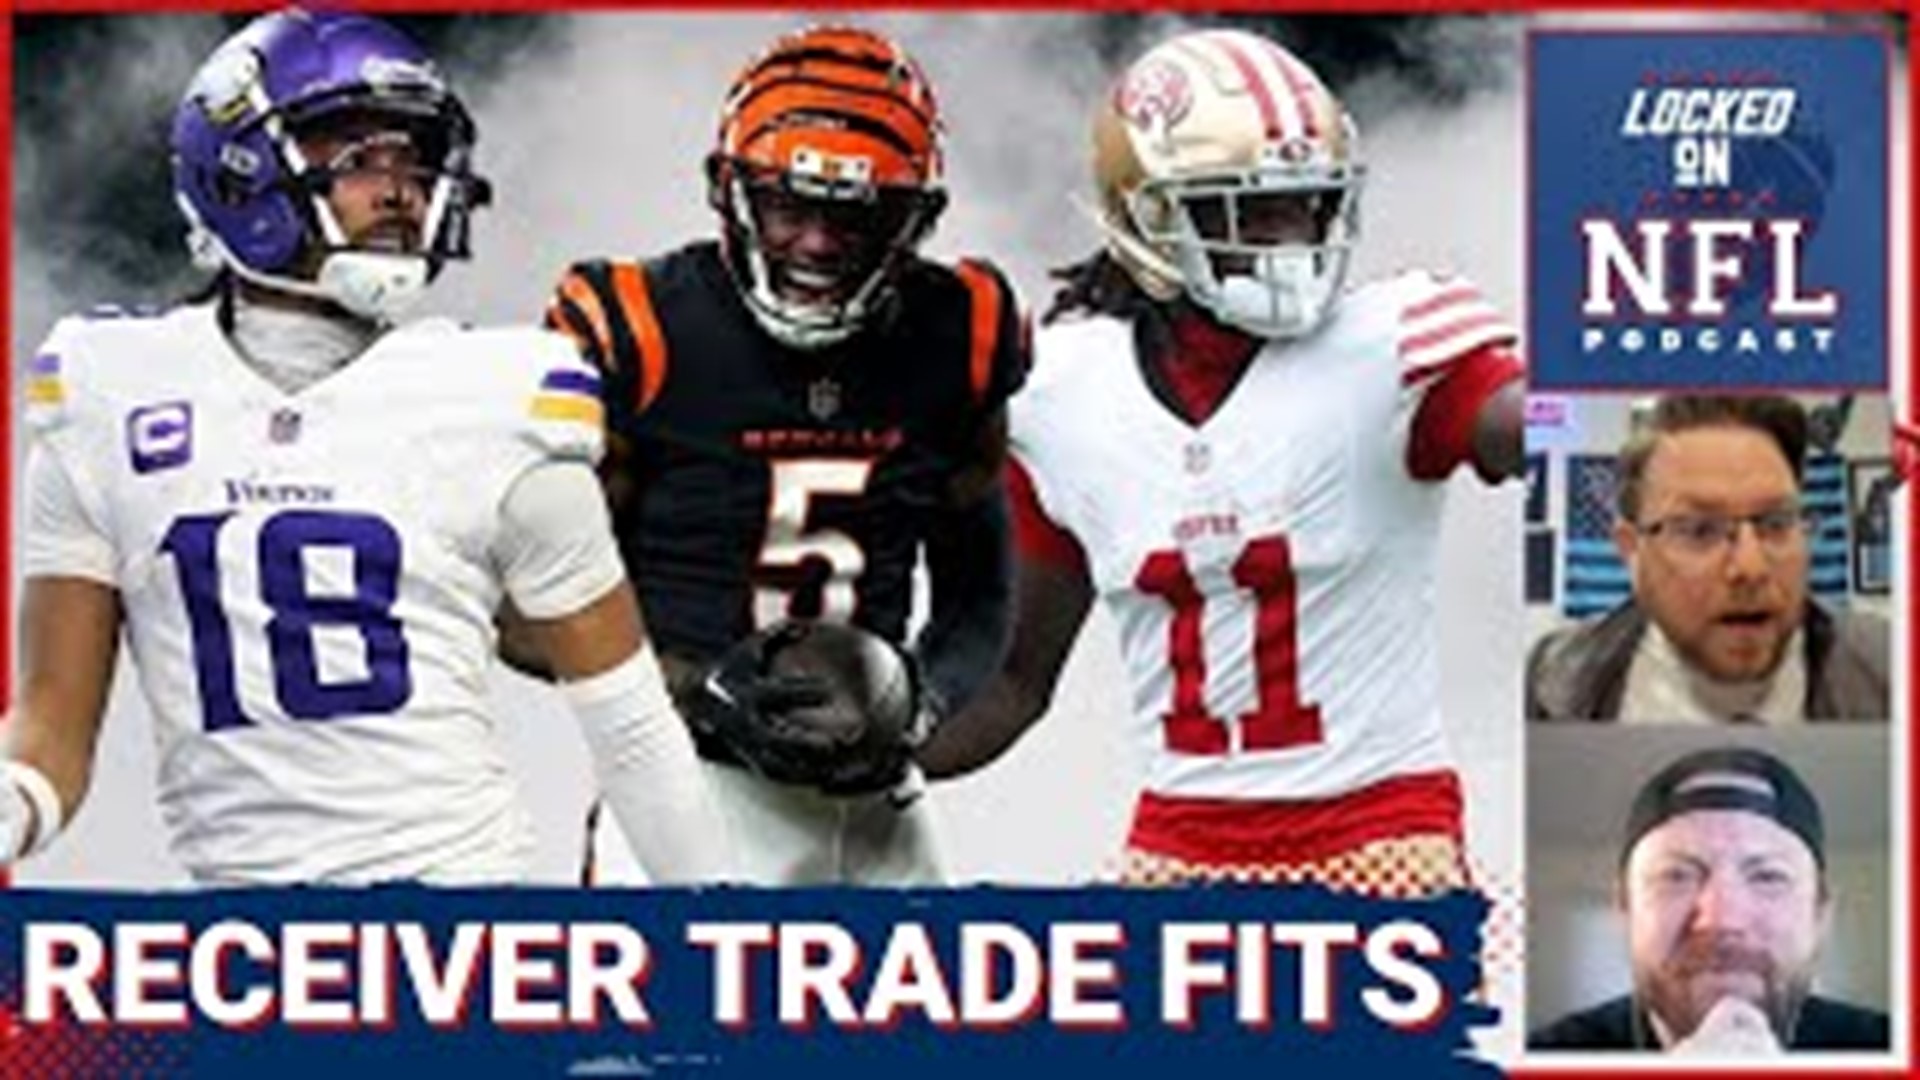 We have seen a ton of movement in the wide receiver market over the past few weeks and may see even more before the season arrives with many potential options.